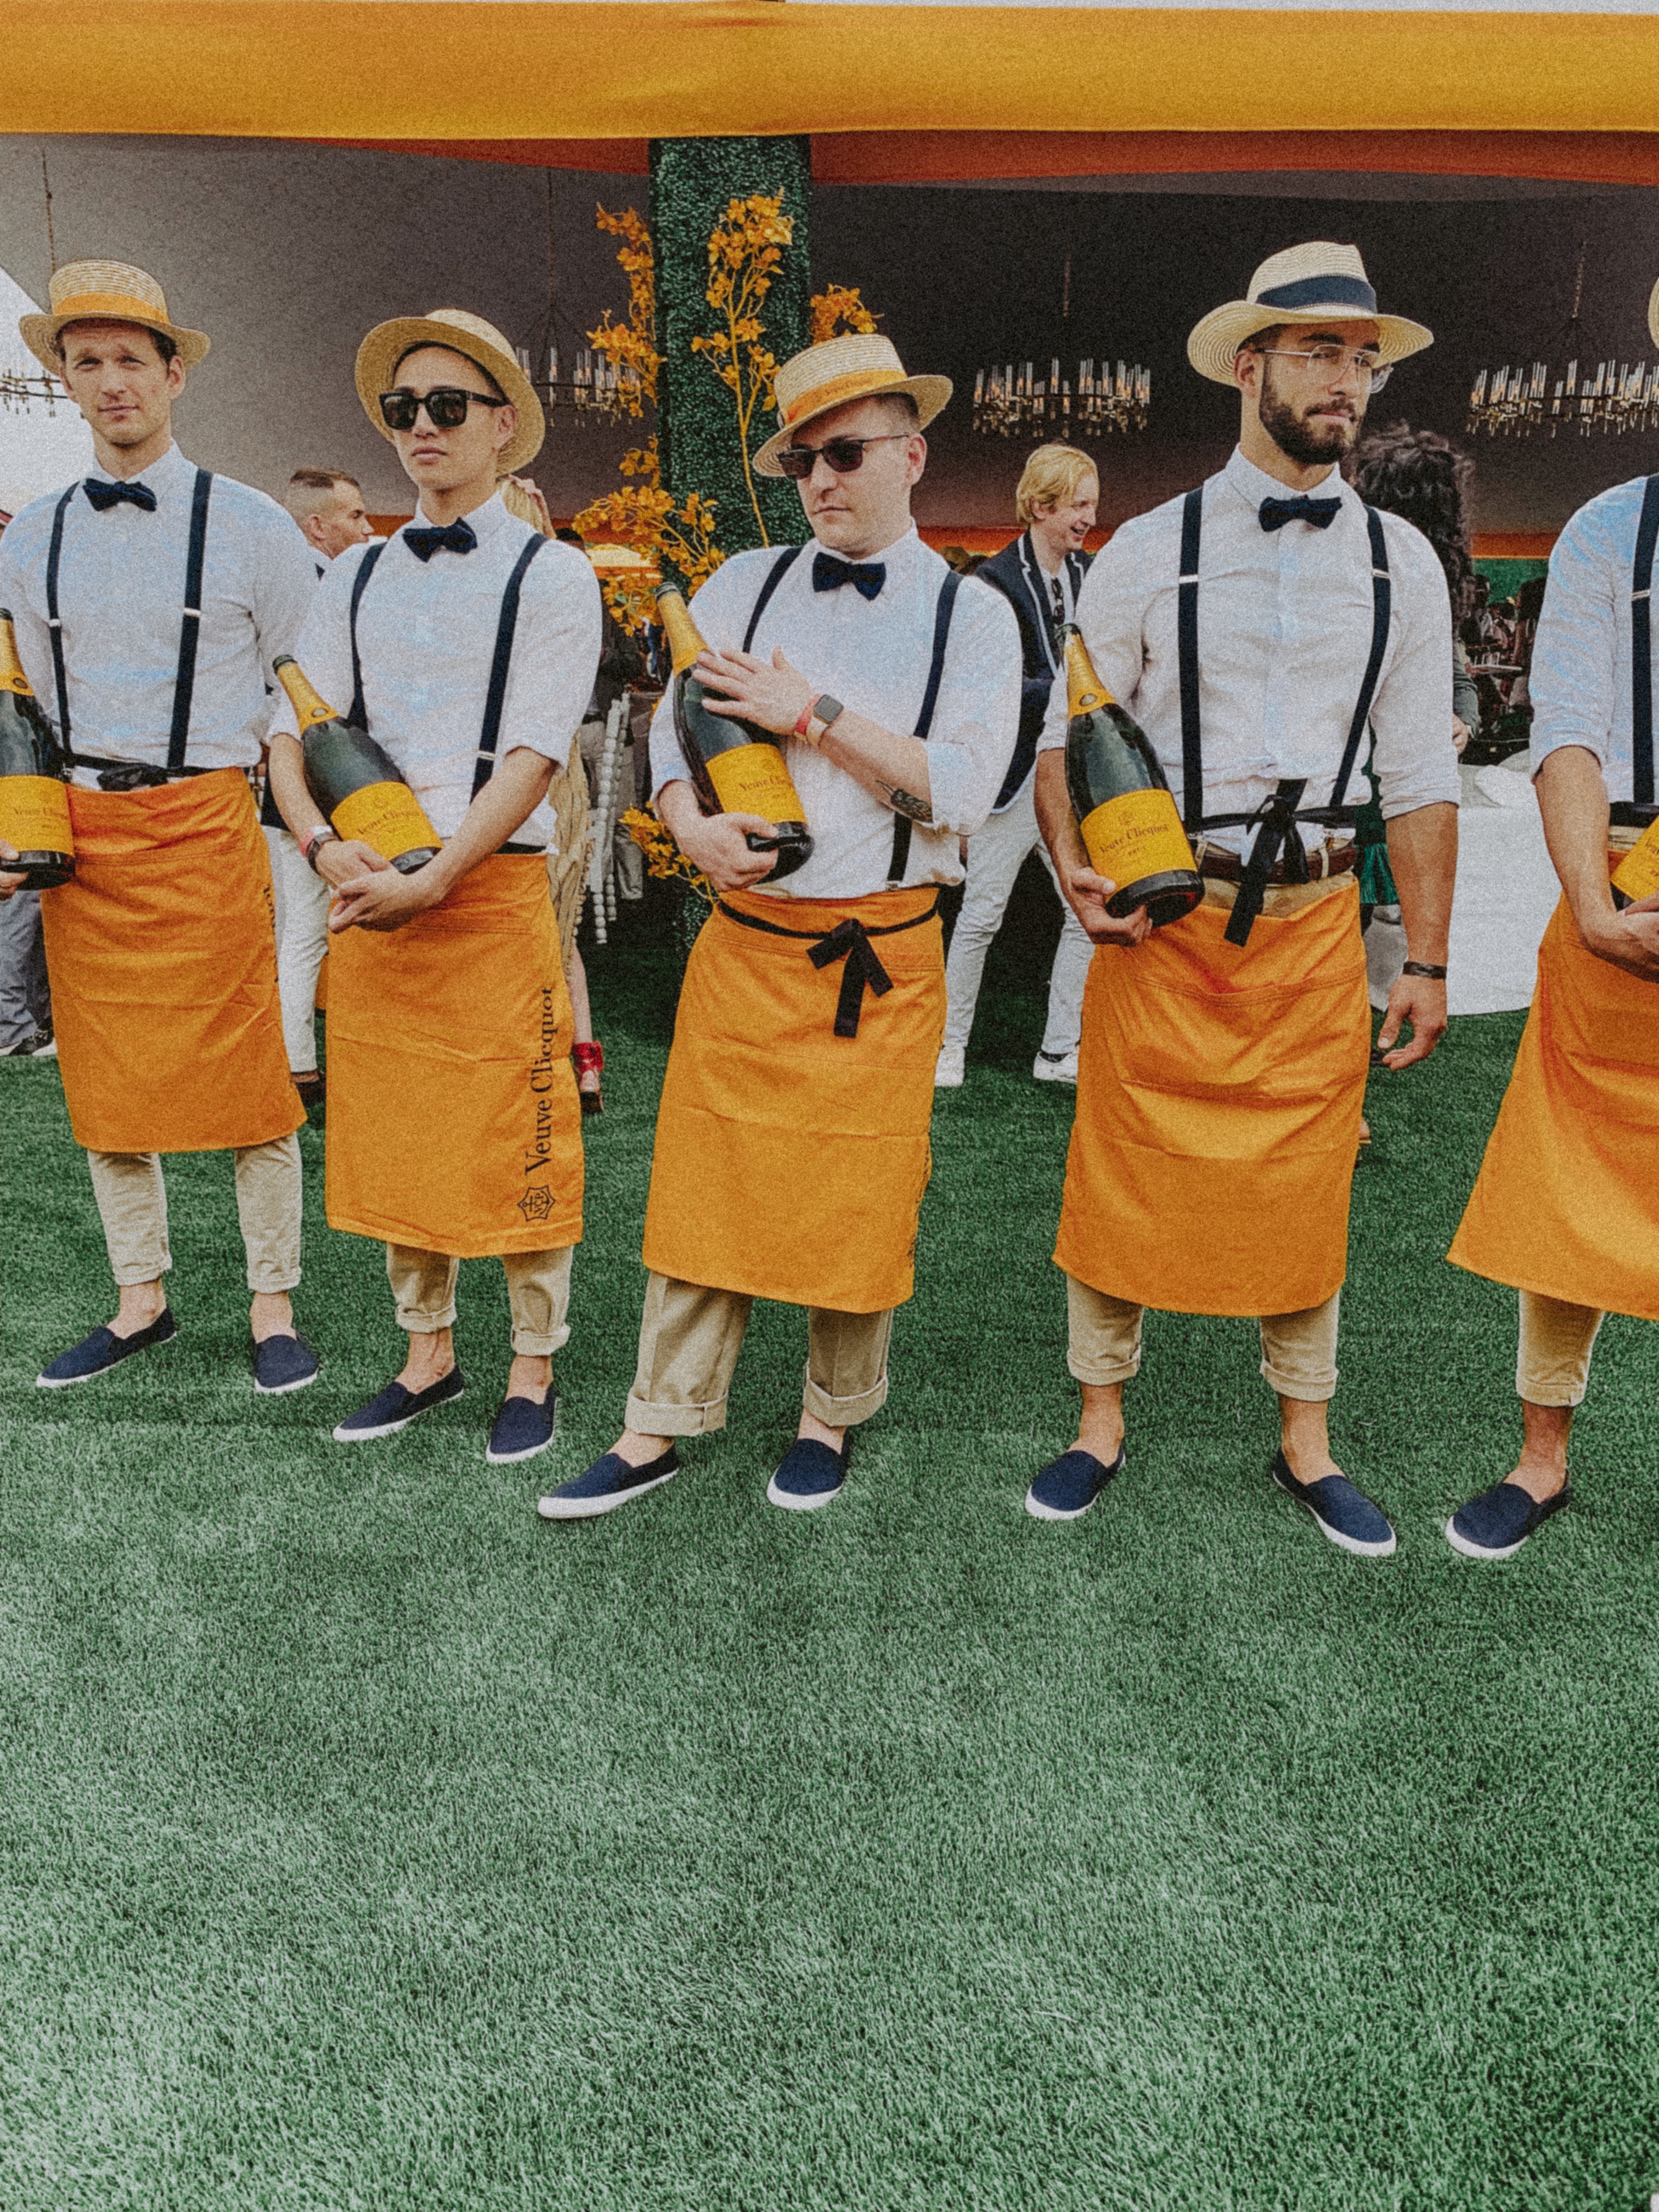 Veuve Clicquot Polo Classic Virtually Toasts America - The Knockturnal